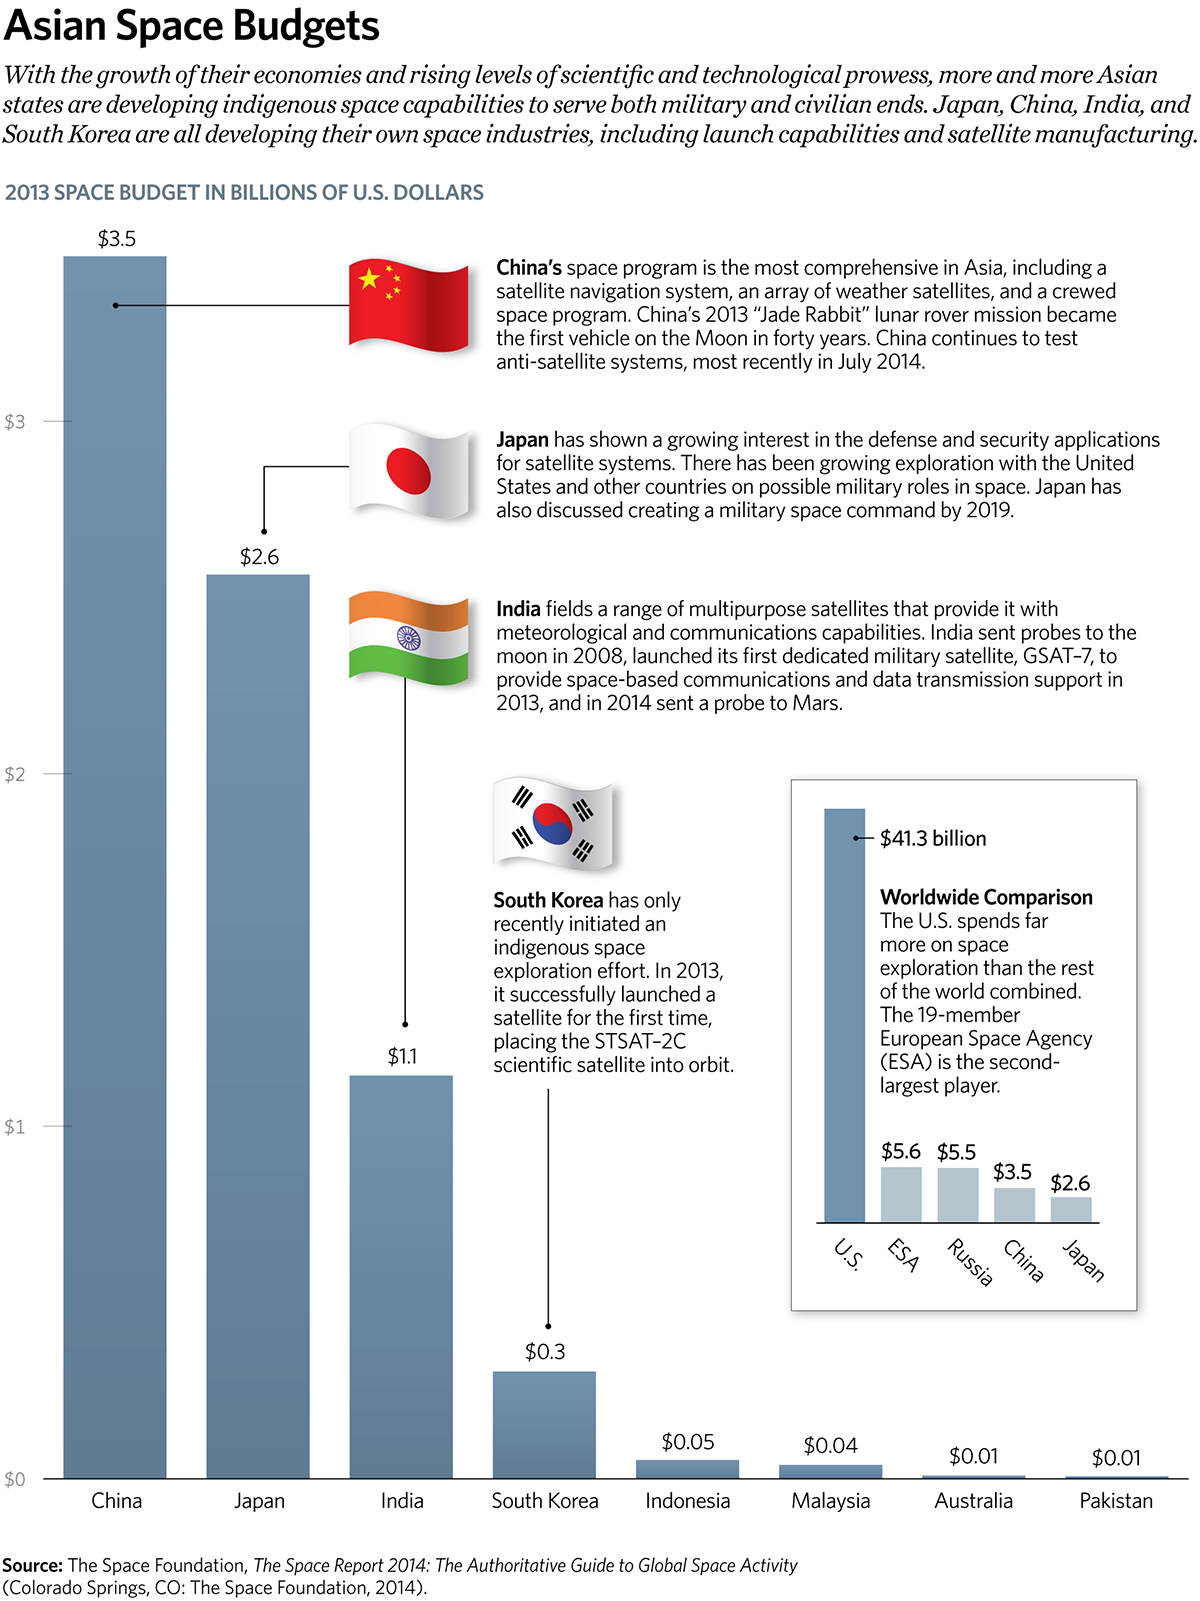 The Growth of Nuclear Power in Asia